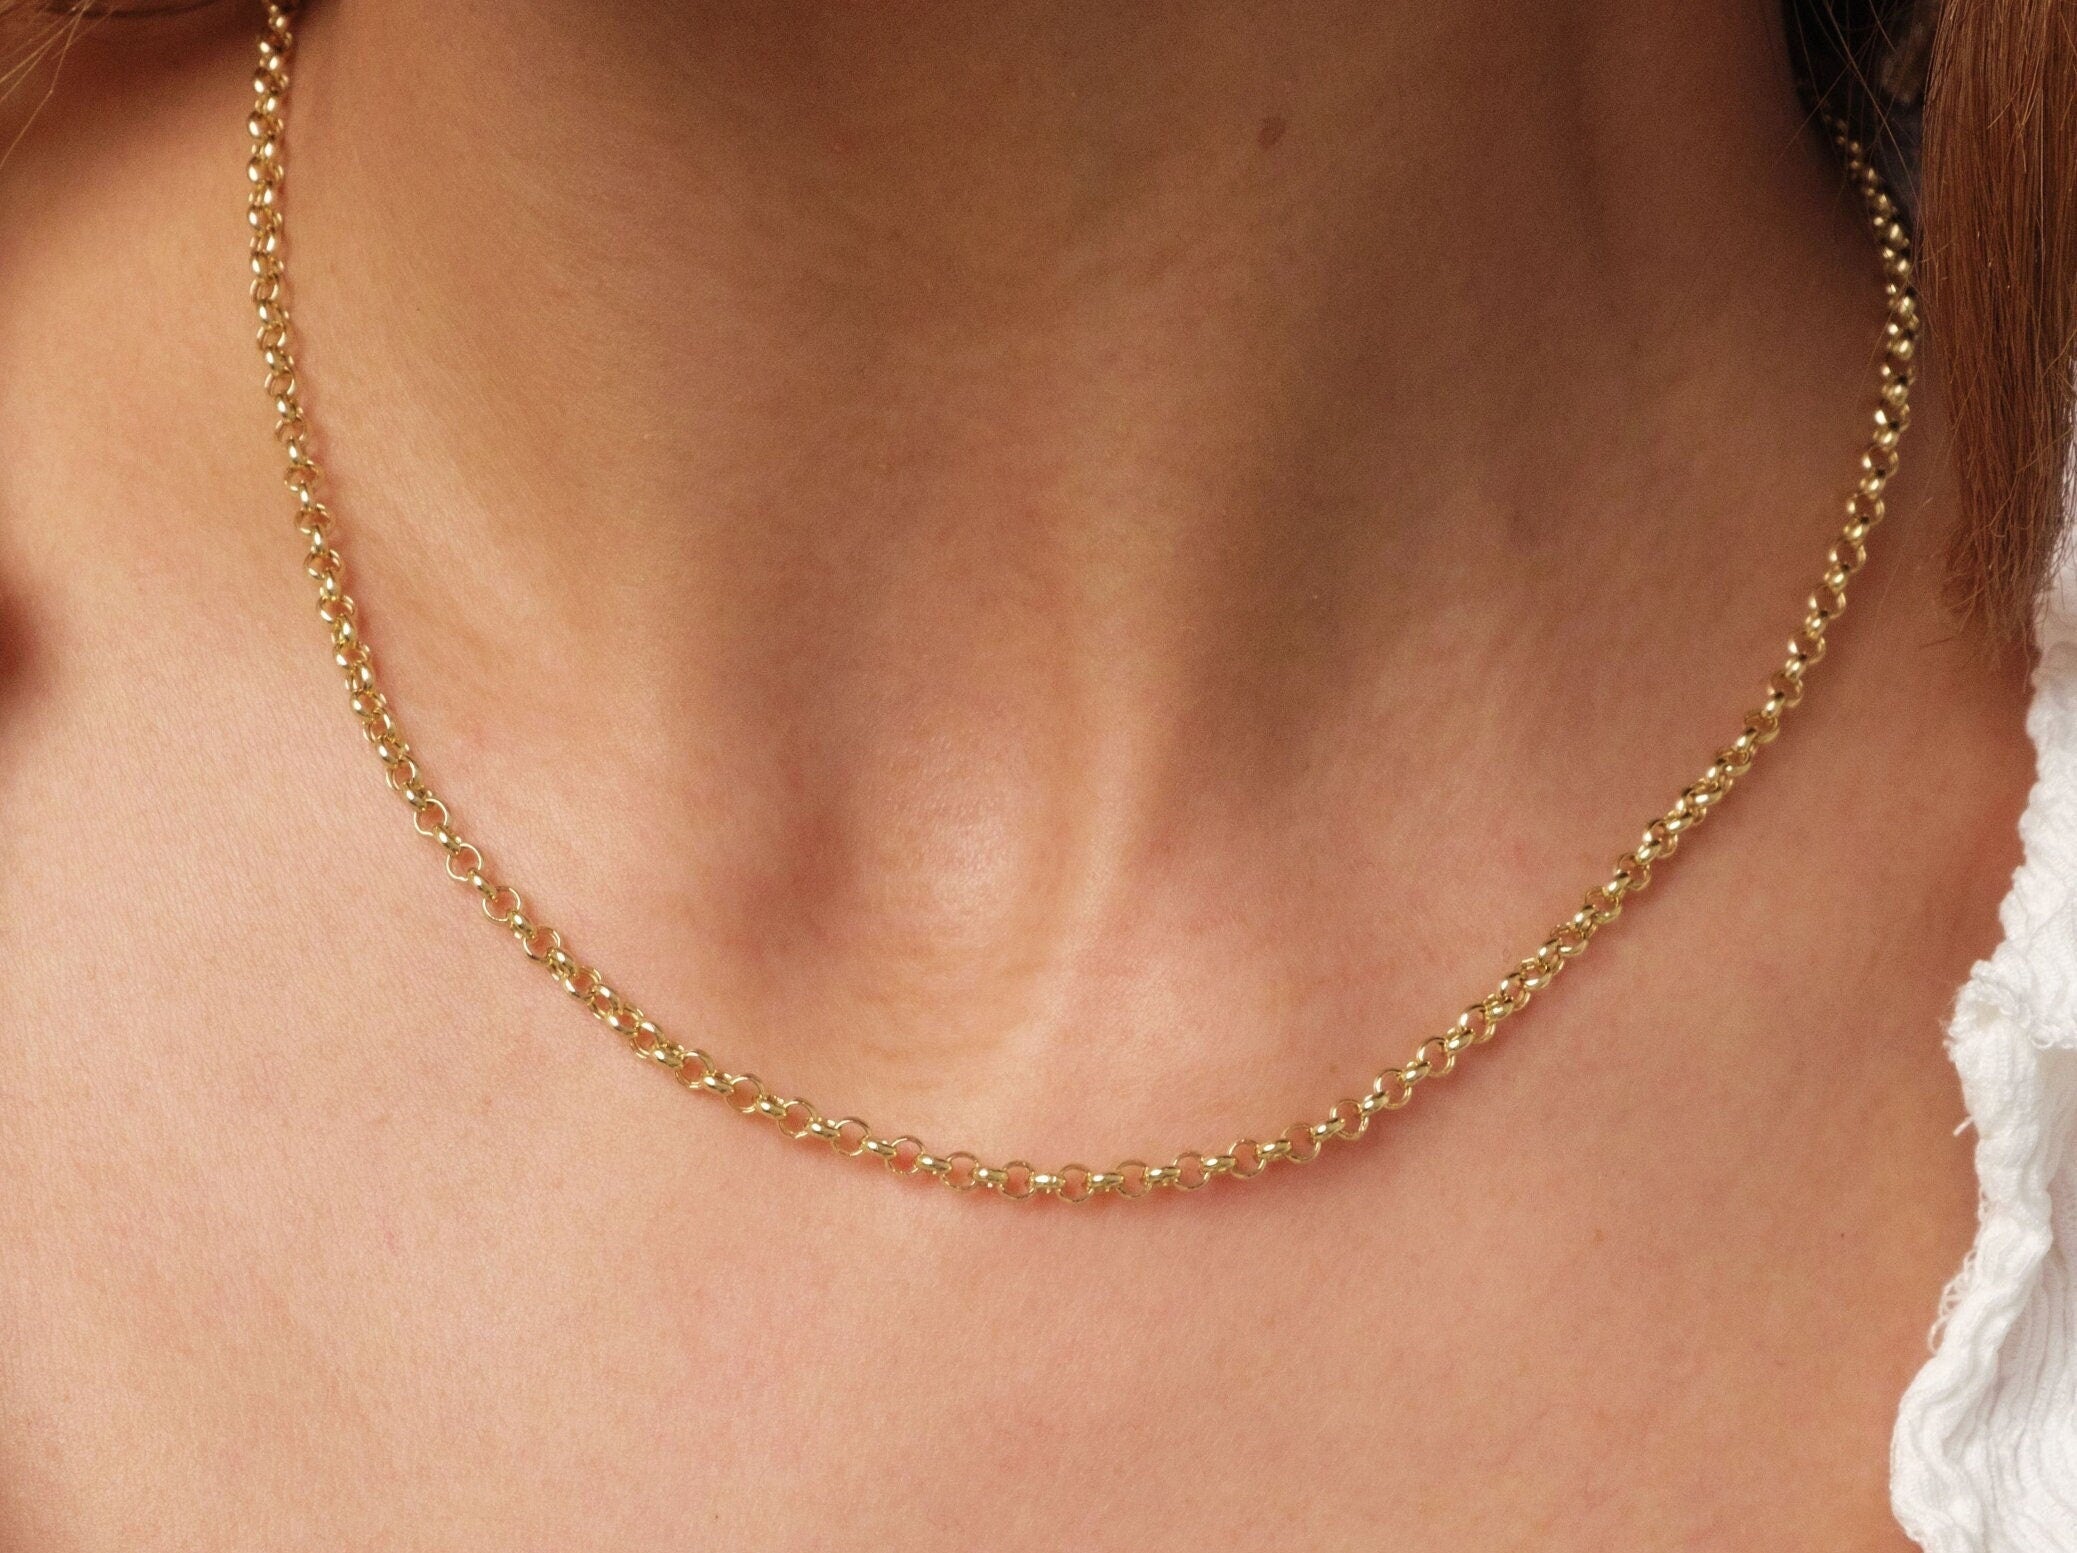 14K Gold Rolo Chain Necklace, 3mm Gold Link Belcher Chain Choker, Round Link Charm Necklace, Minimal Delicate Round Necklace, Woman, Men